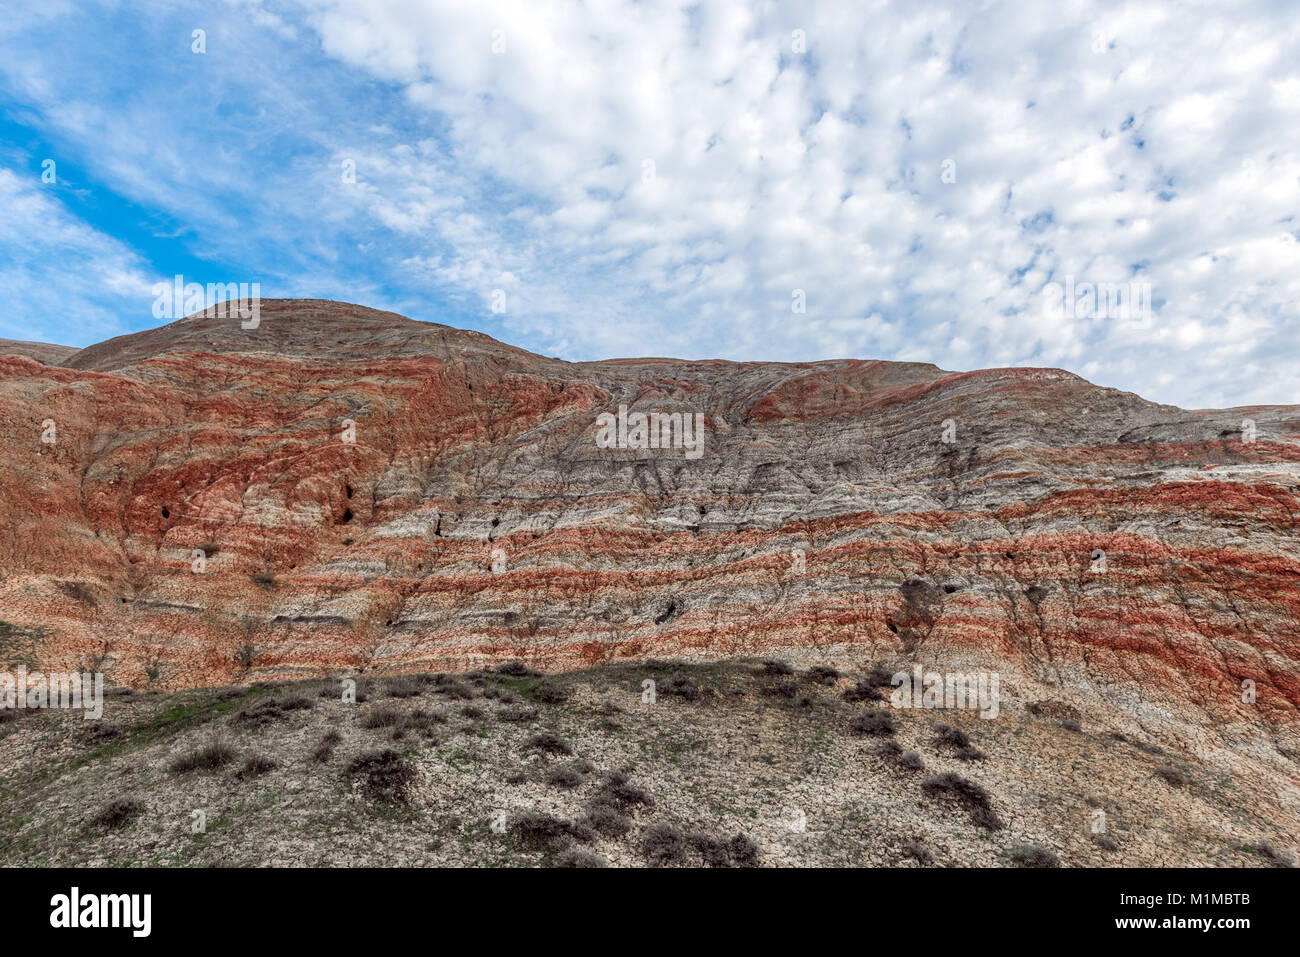 Amazing striped red mountains Stock Photo